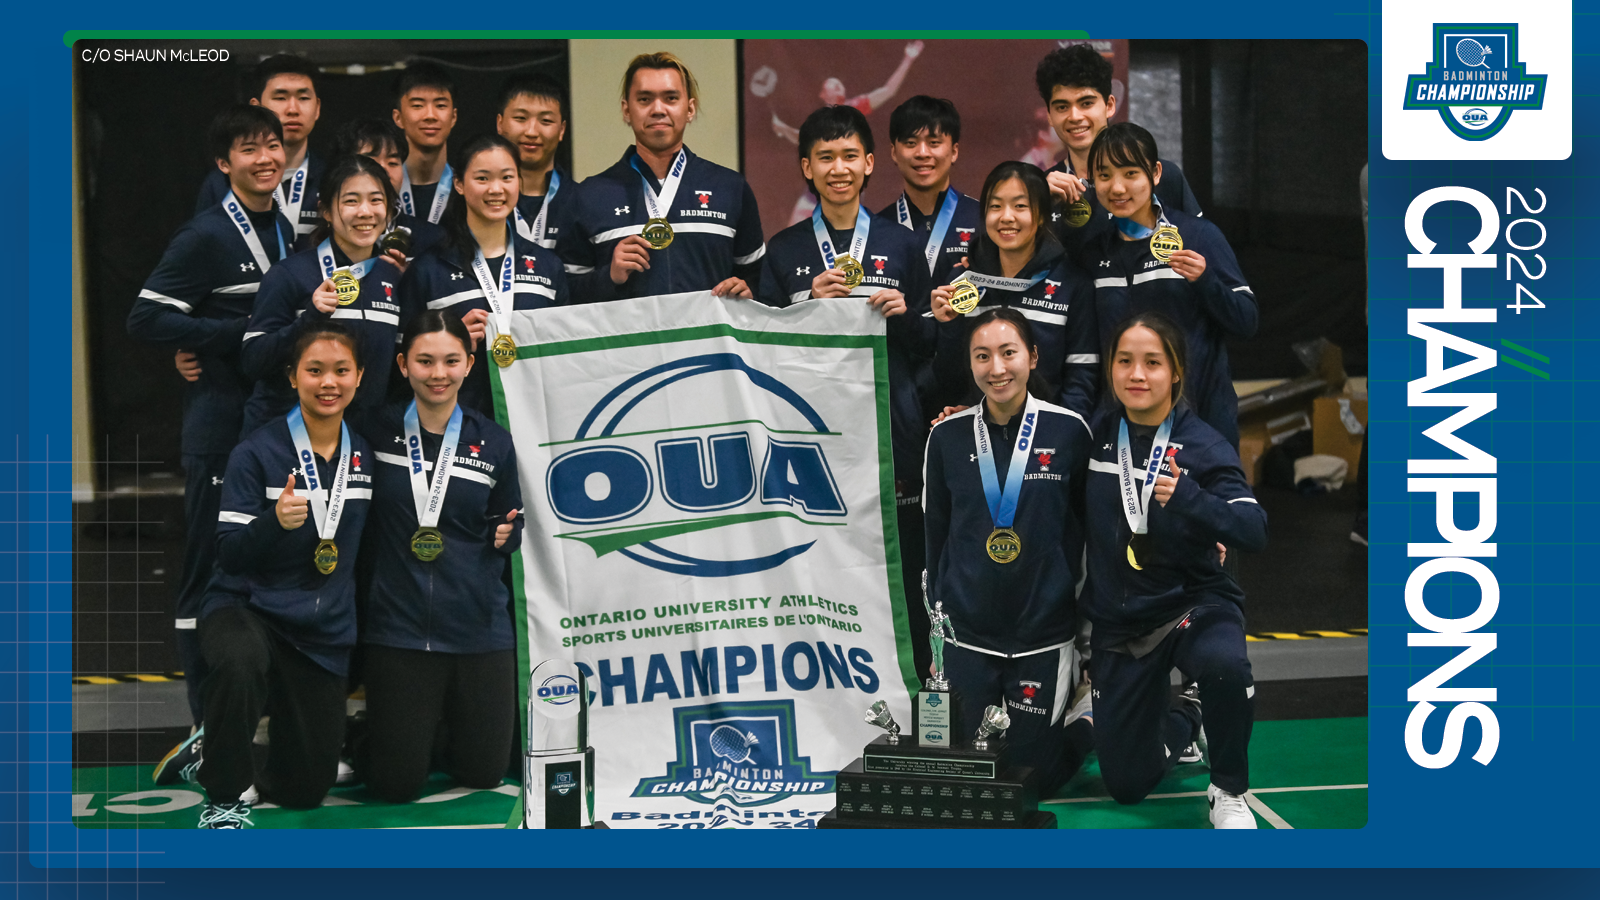 Predominantly blue graphic covered mostly by 2024 OUA Badminton Championship banner photo, with the corresponding championship logo and white text reading '2024 Champions' on the right side